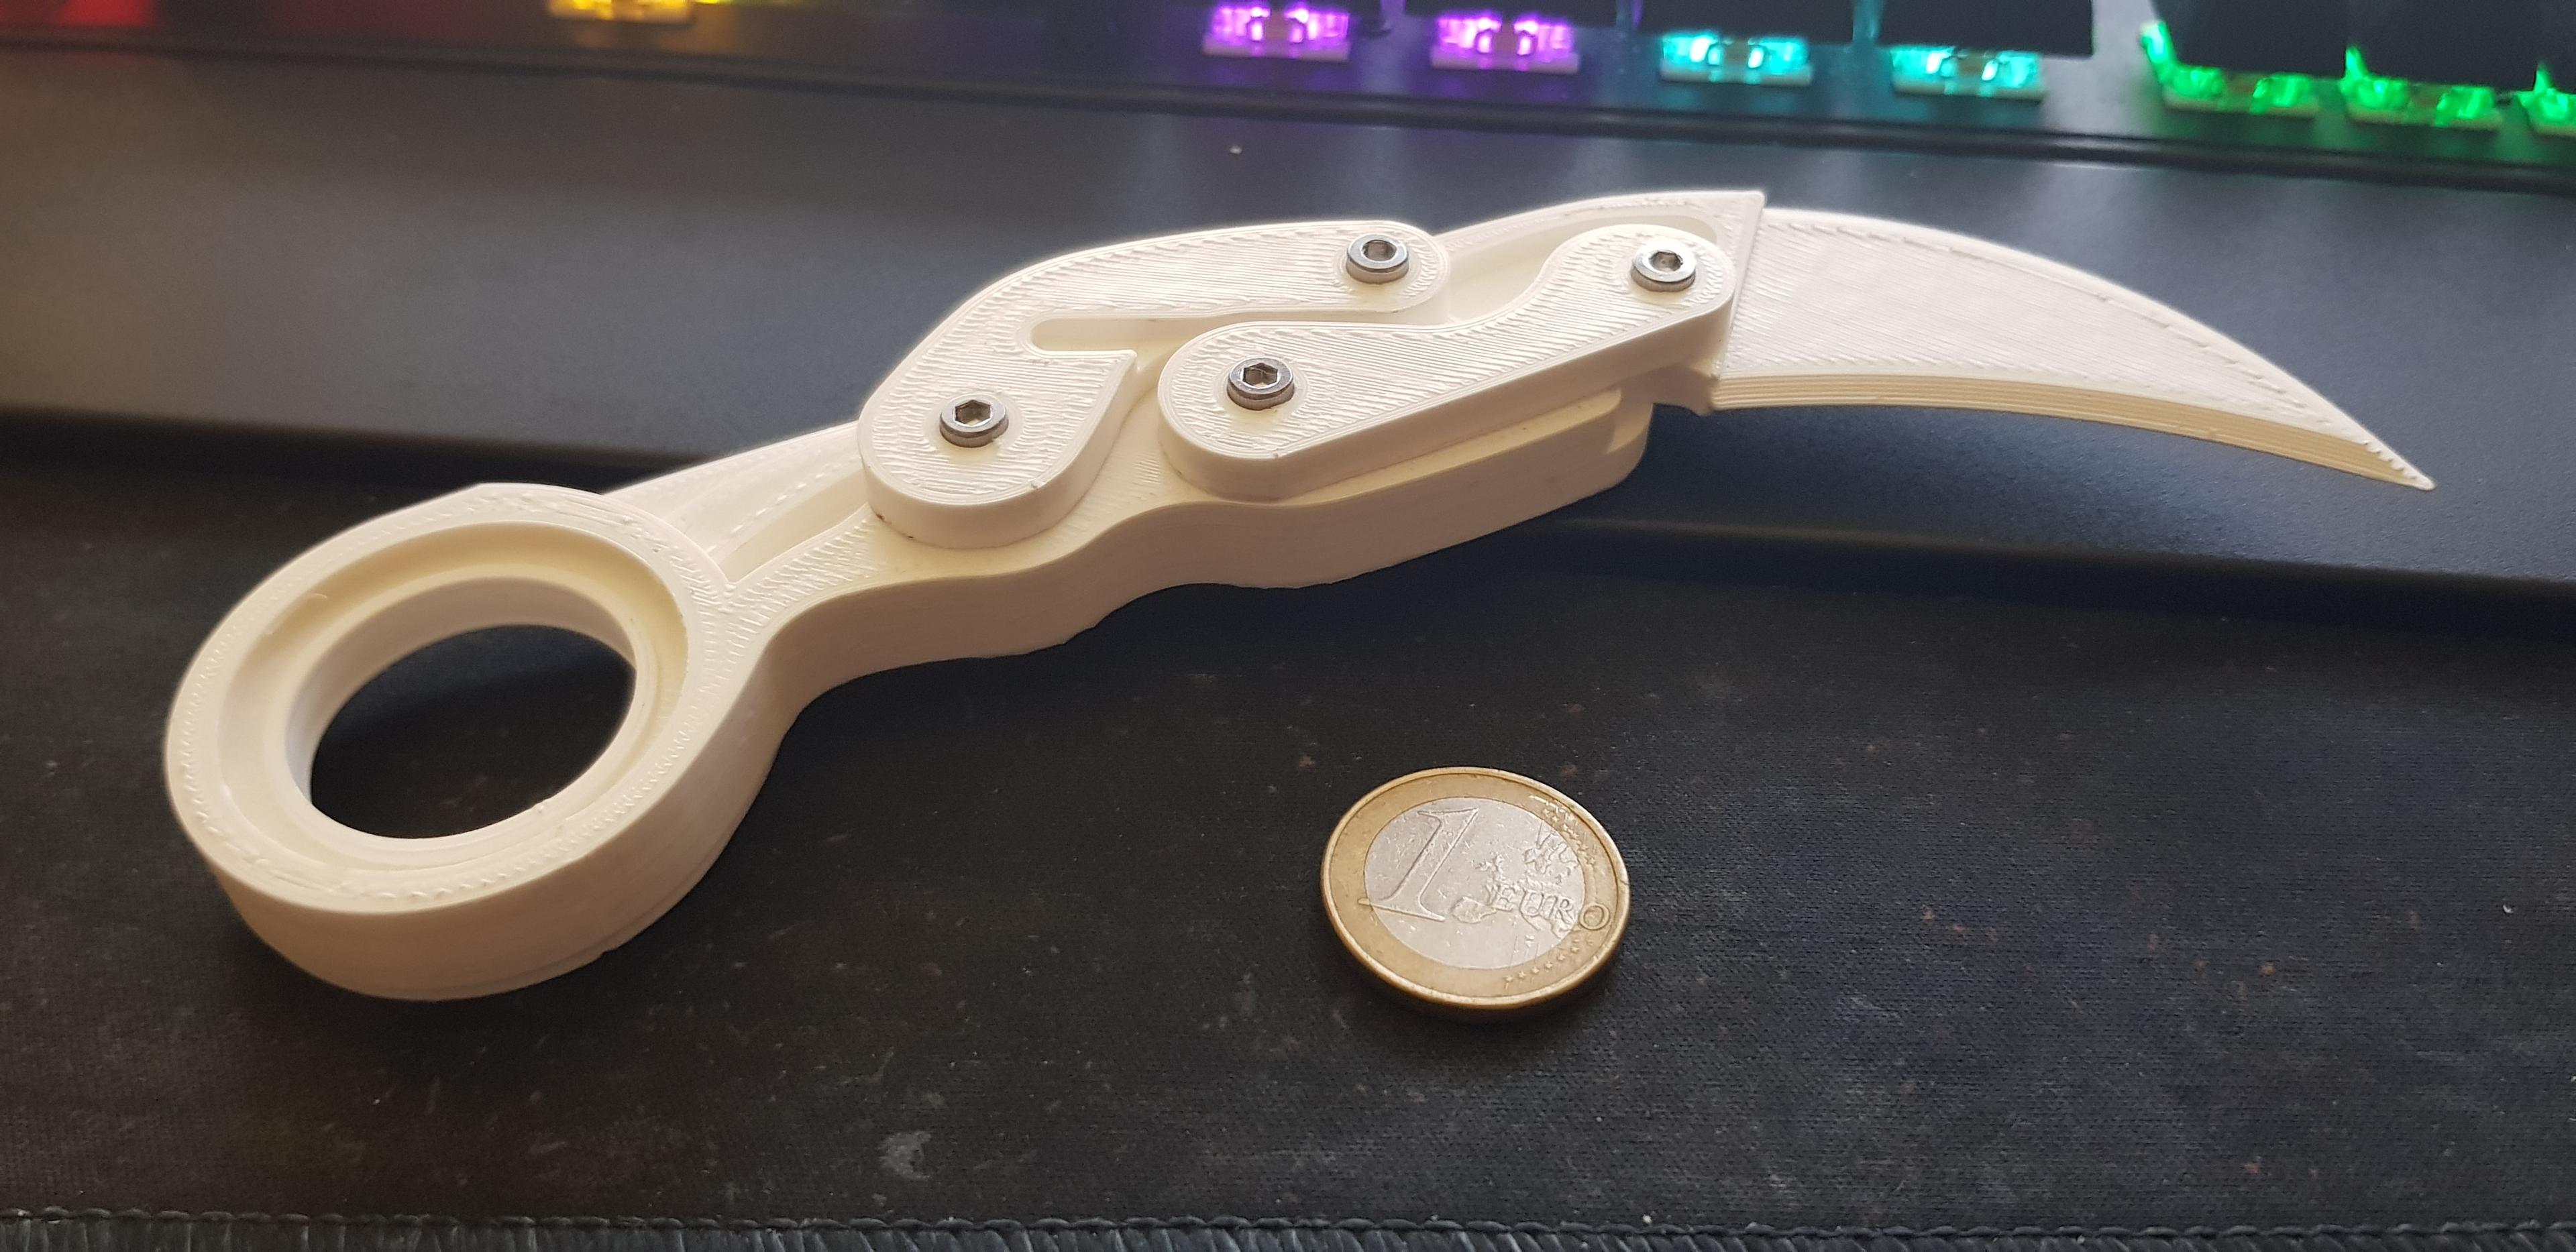 Folding Pocket Karambit - Really easy to mount and print, i use a m3x8mm screws to mount. Thanks! - 3d model